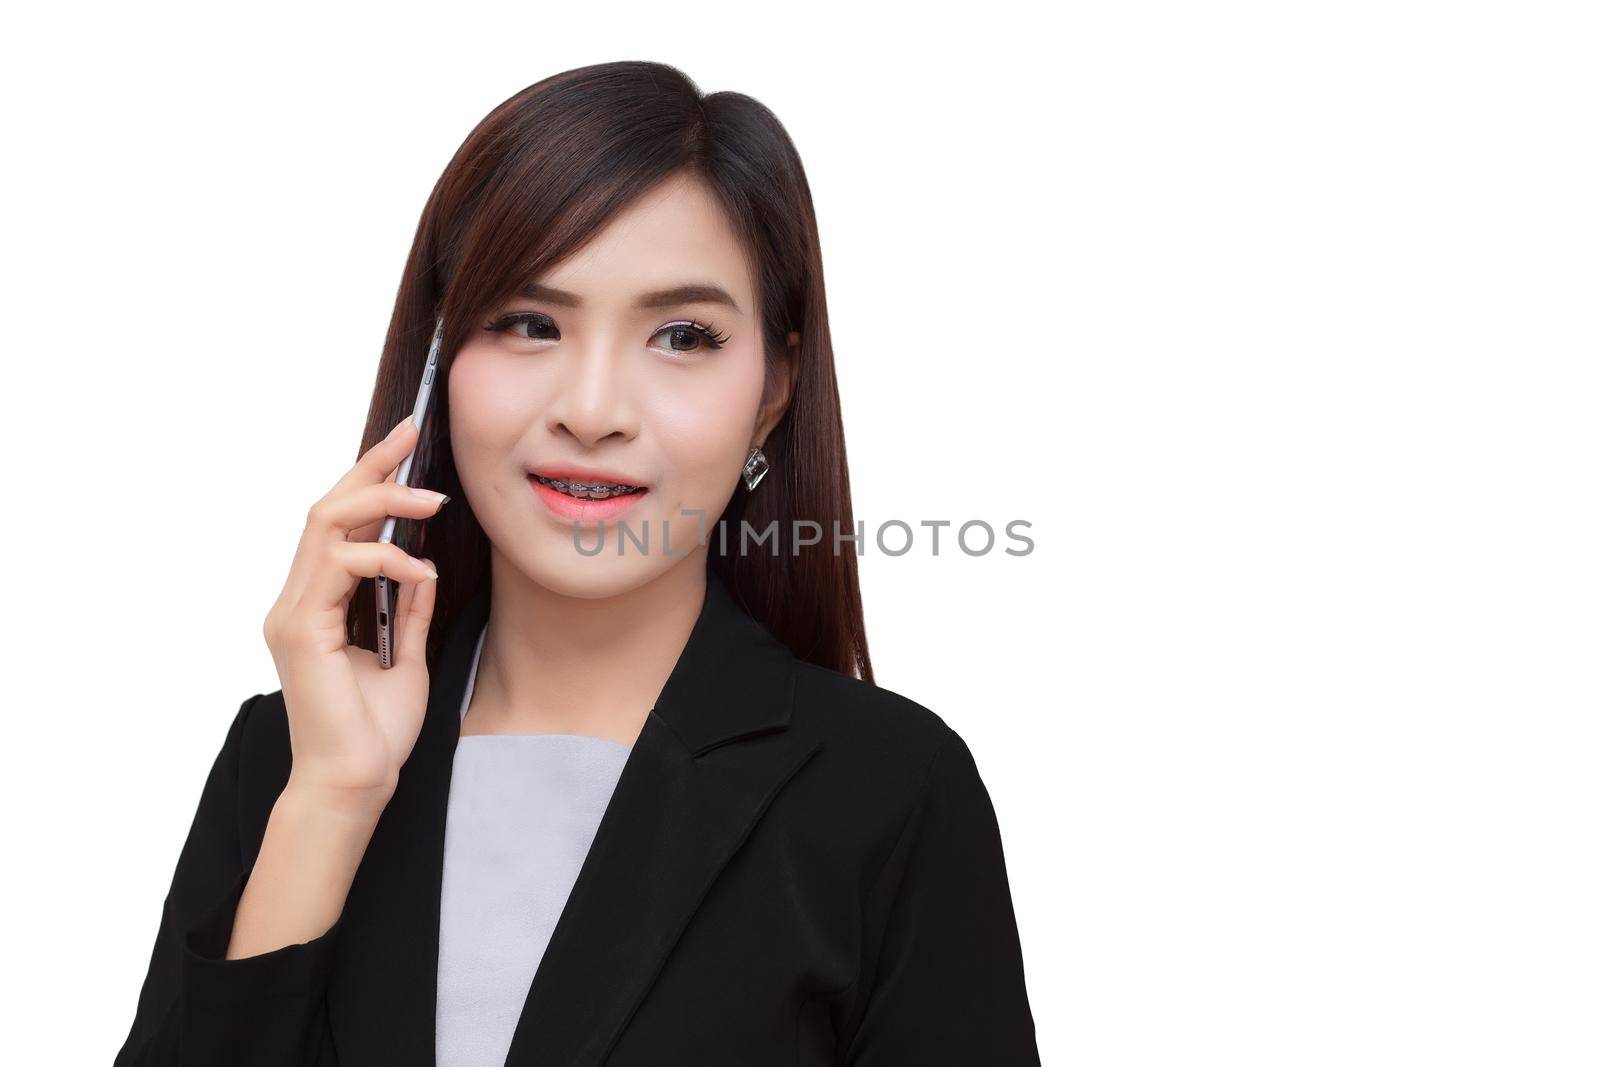 Smart phone with business woman.  isolated on a white background